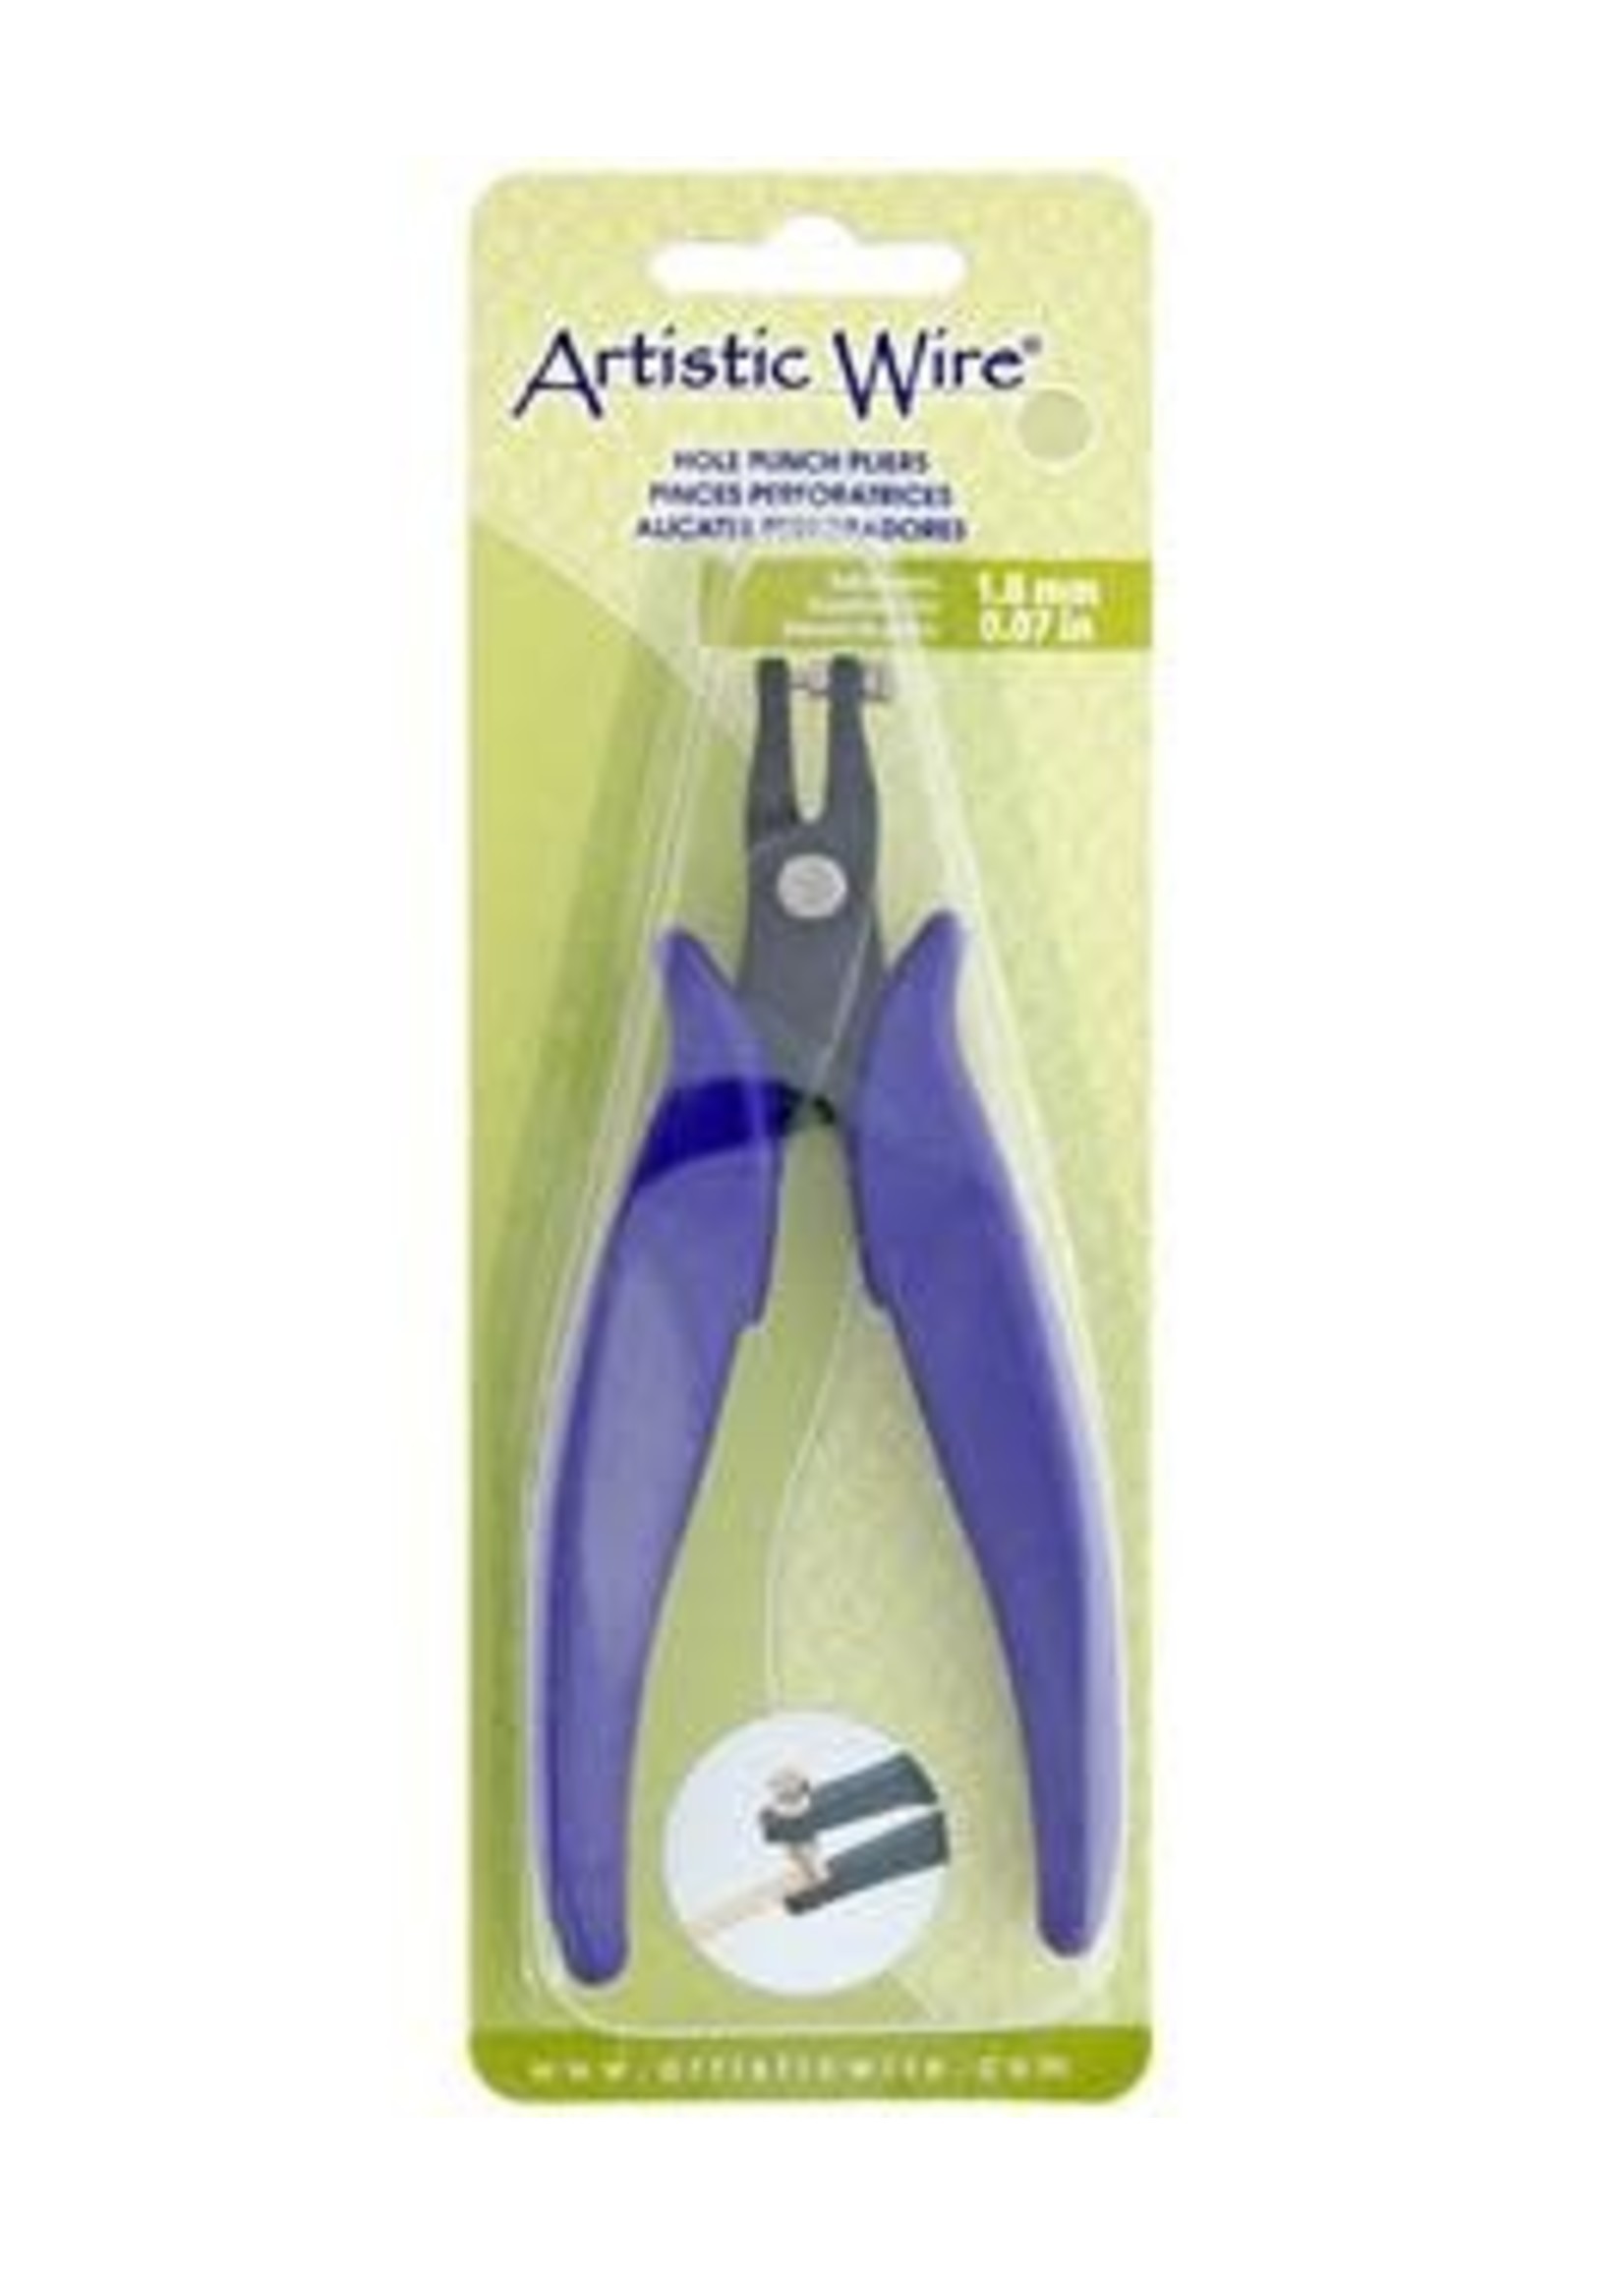 Artistic Wire Hole Punch Pliers 1.8mm